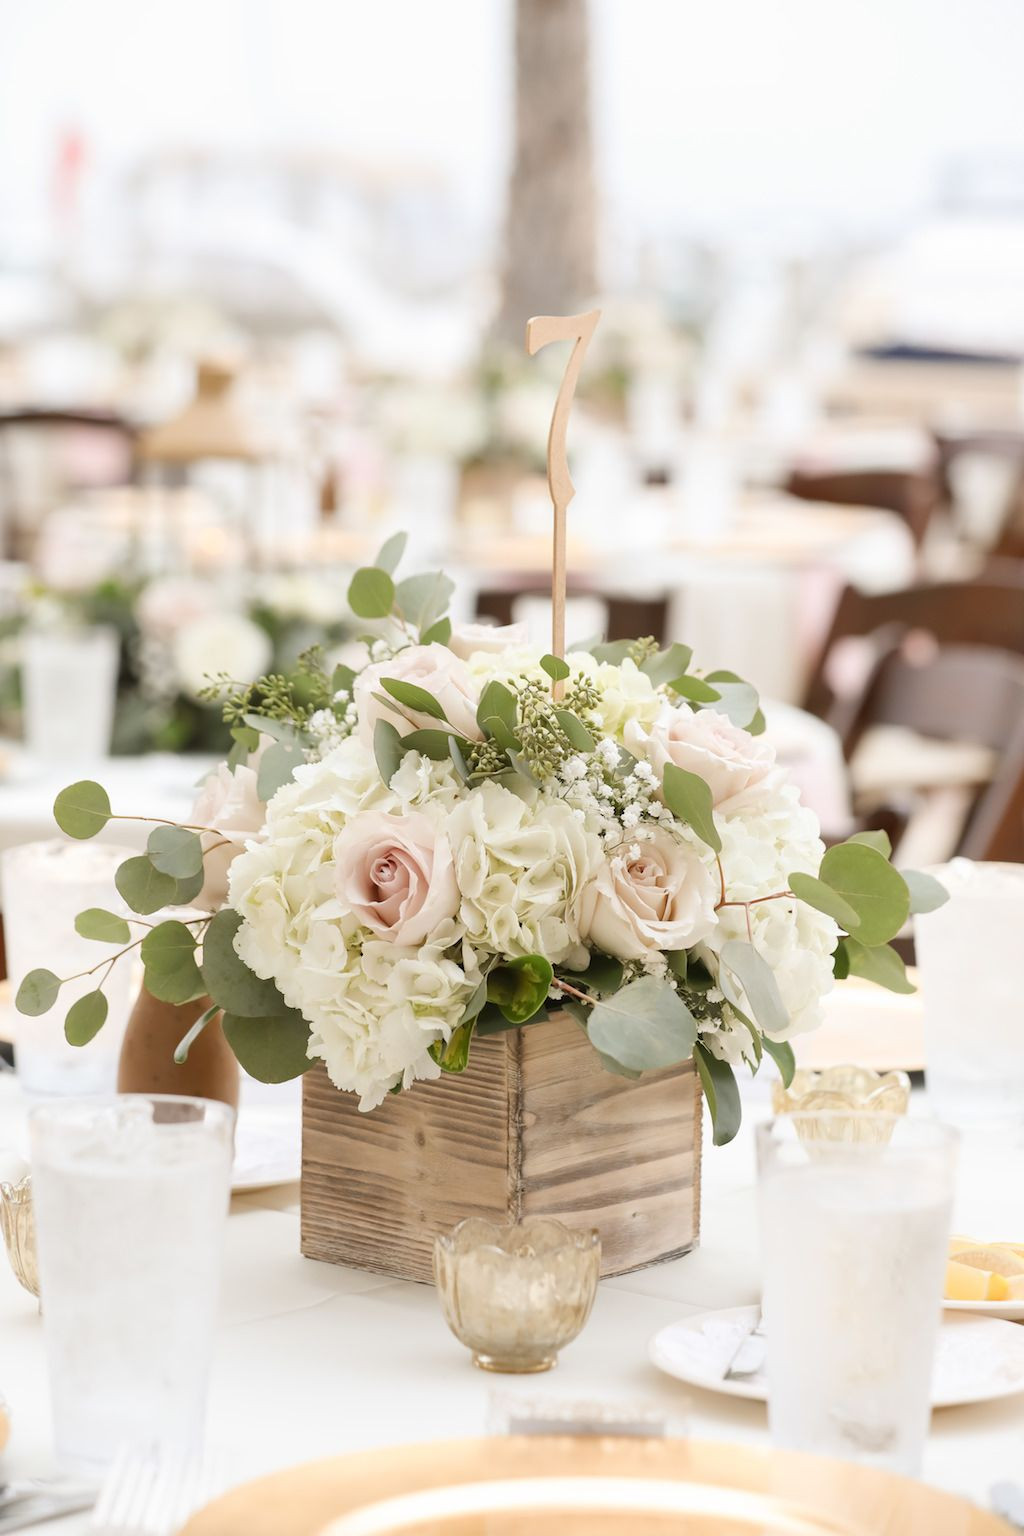 Wedding Reception Flower Arrangements
 Romantic Champagne and Ivory South Tampa Waterfront